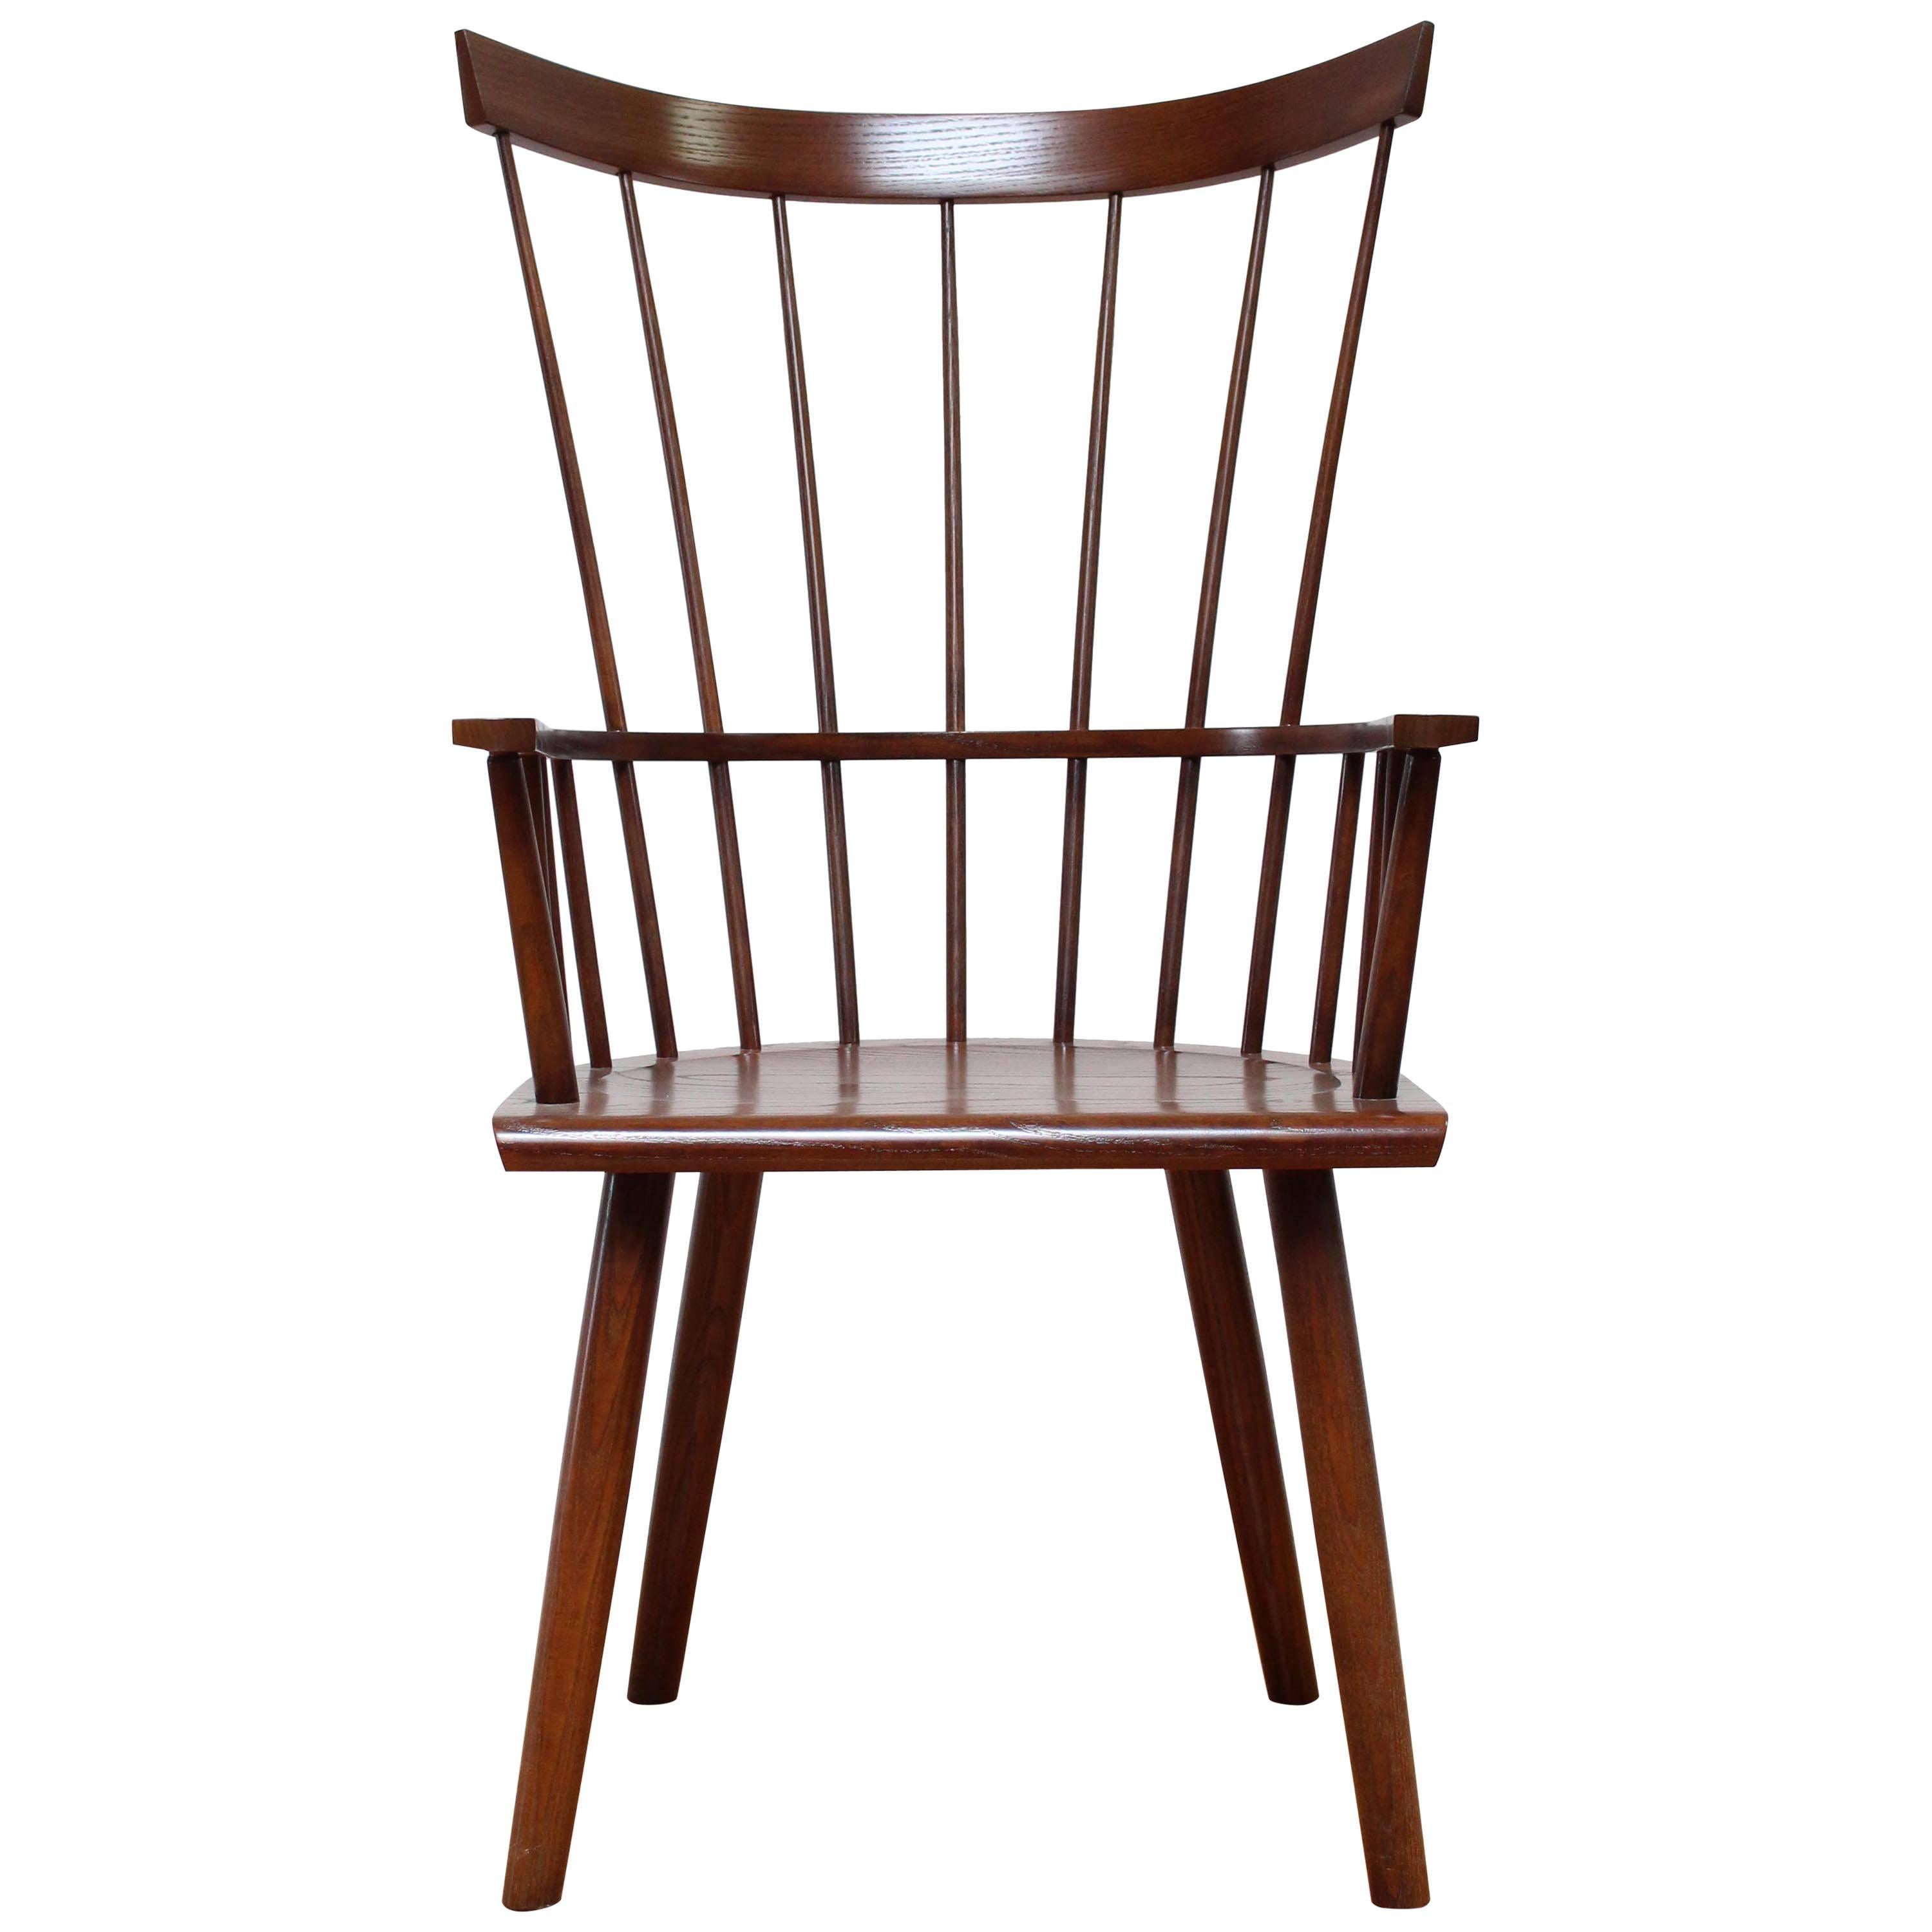 Walnut Stained American Modern Windsor Colt High-Back Armchair by O&G Studio